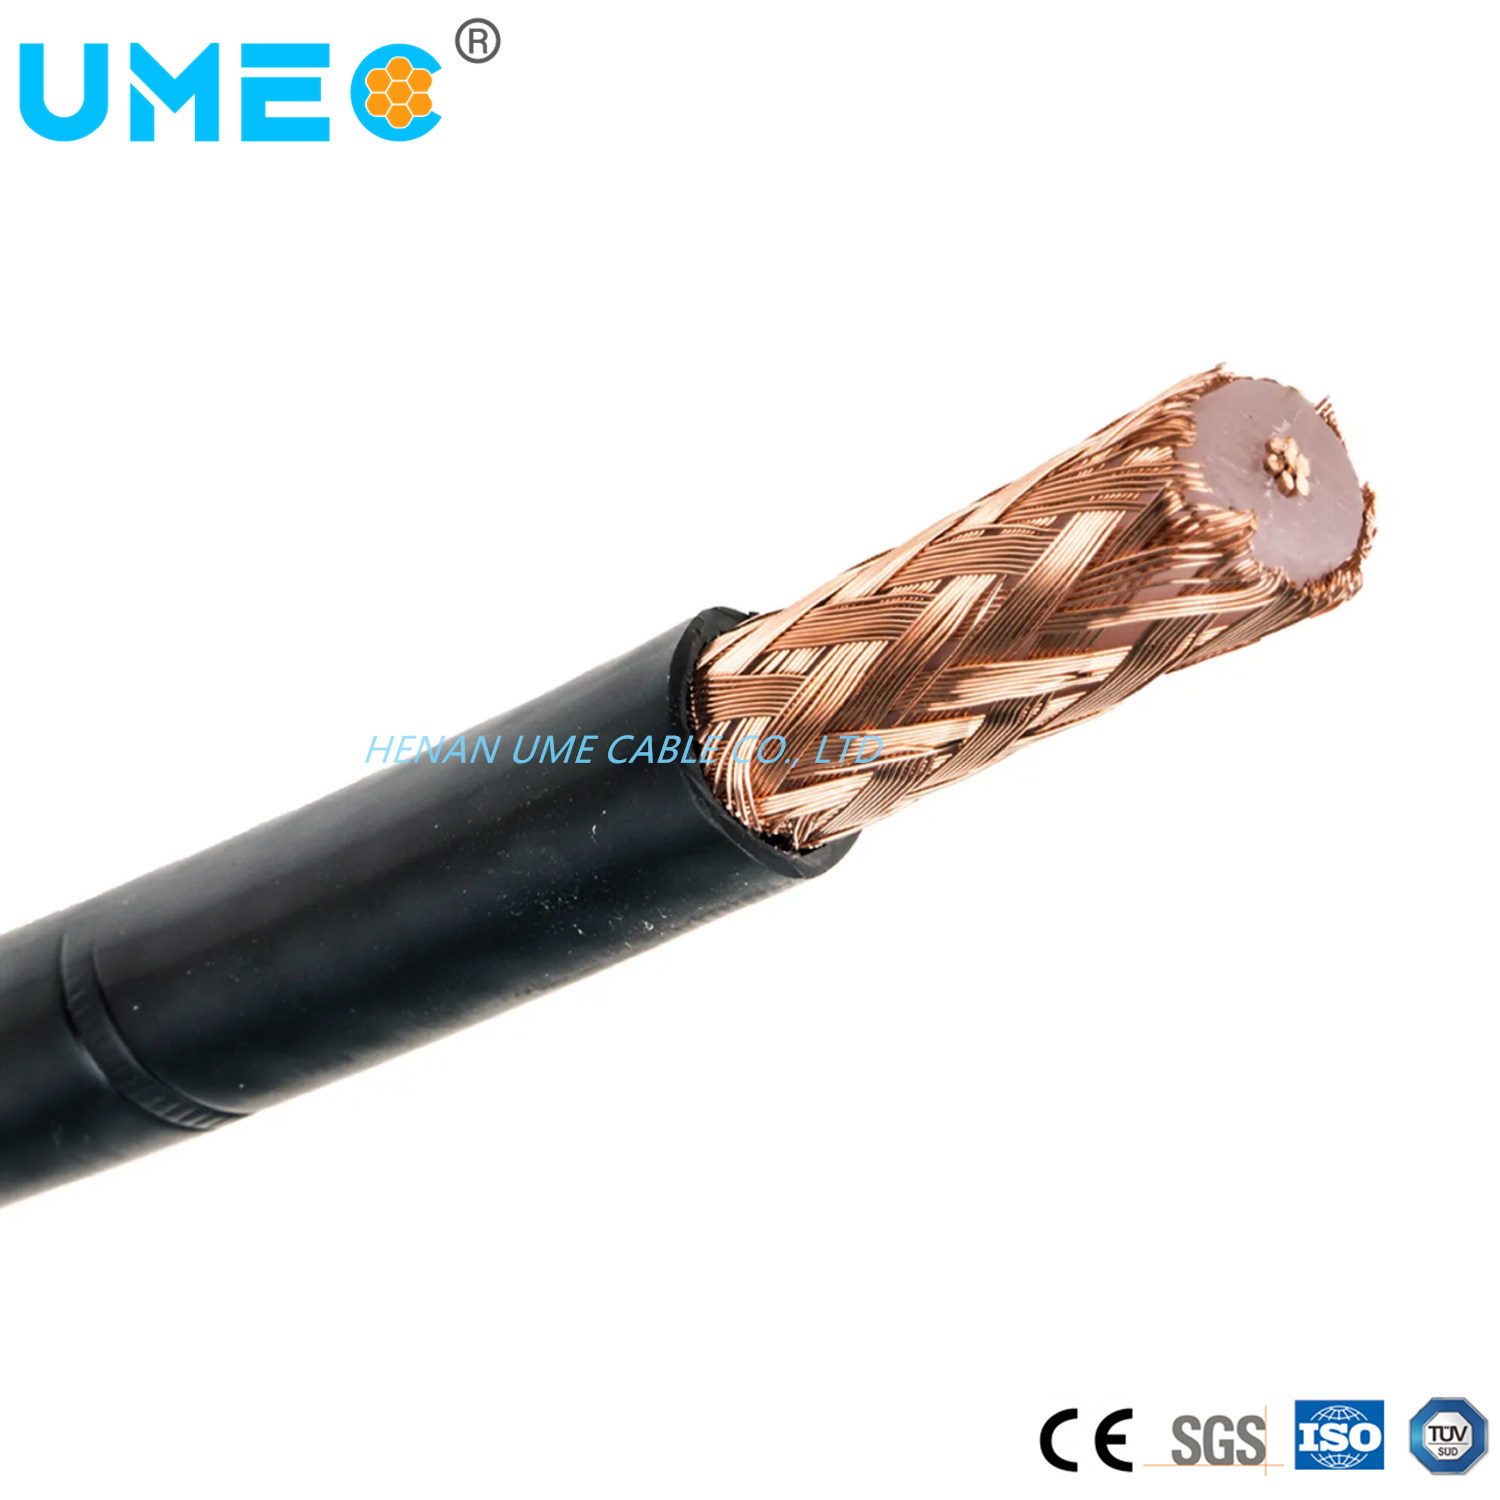 High Quality Rg Series Coaxial Cable ISO CE Certificate Coaxial Rg59 RG6 Rg8 Rg11